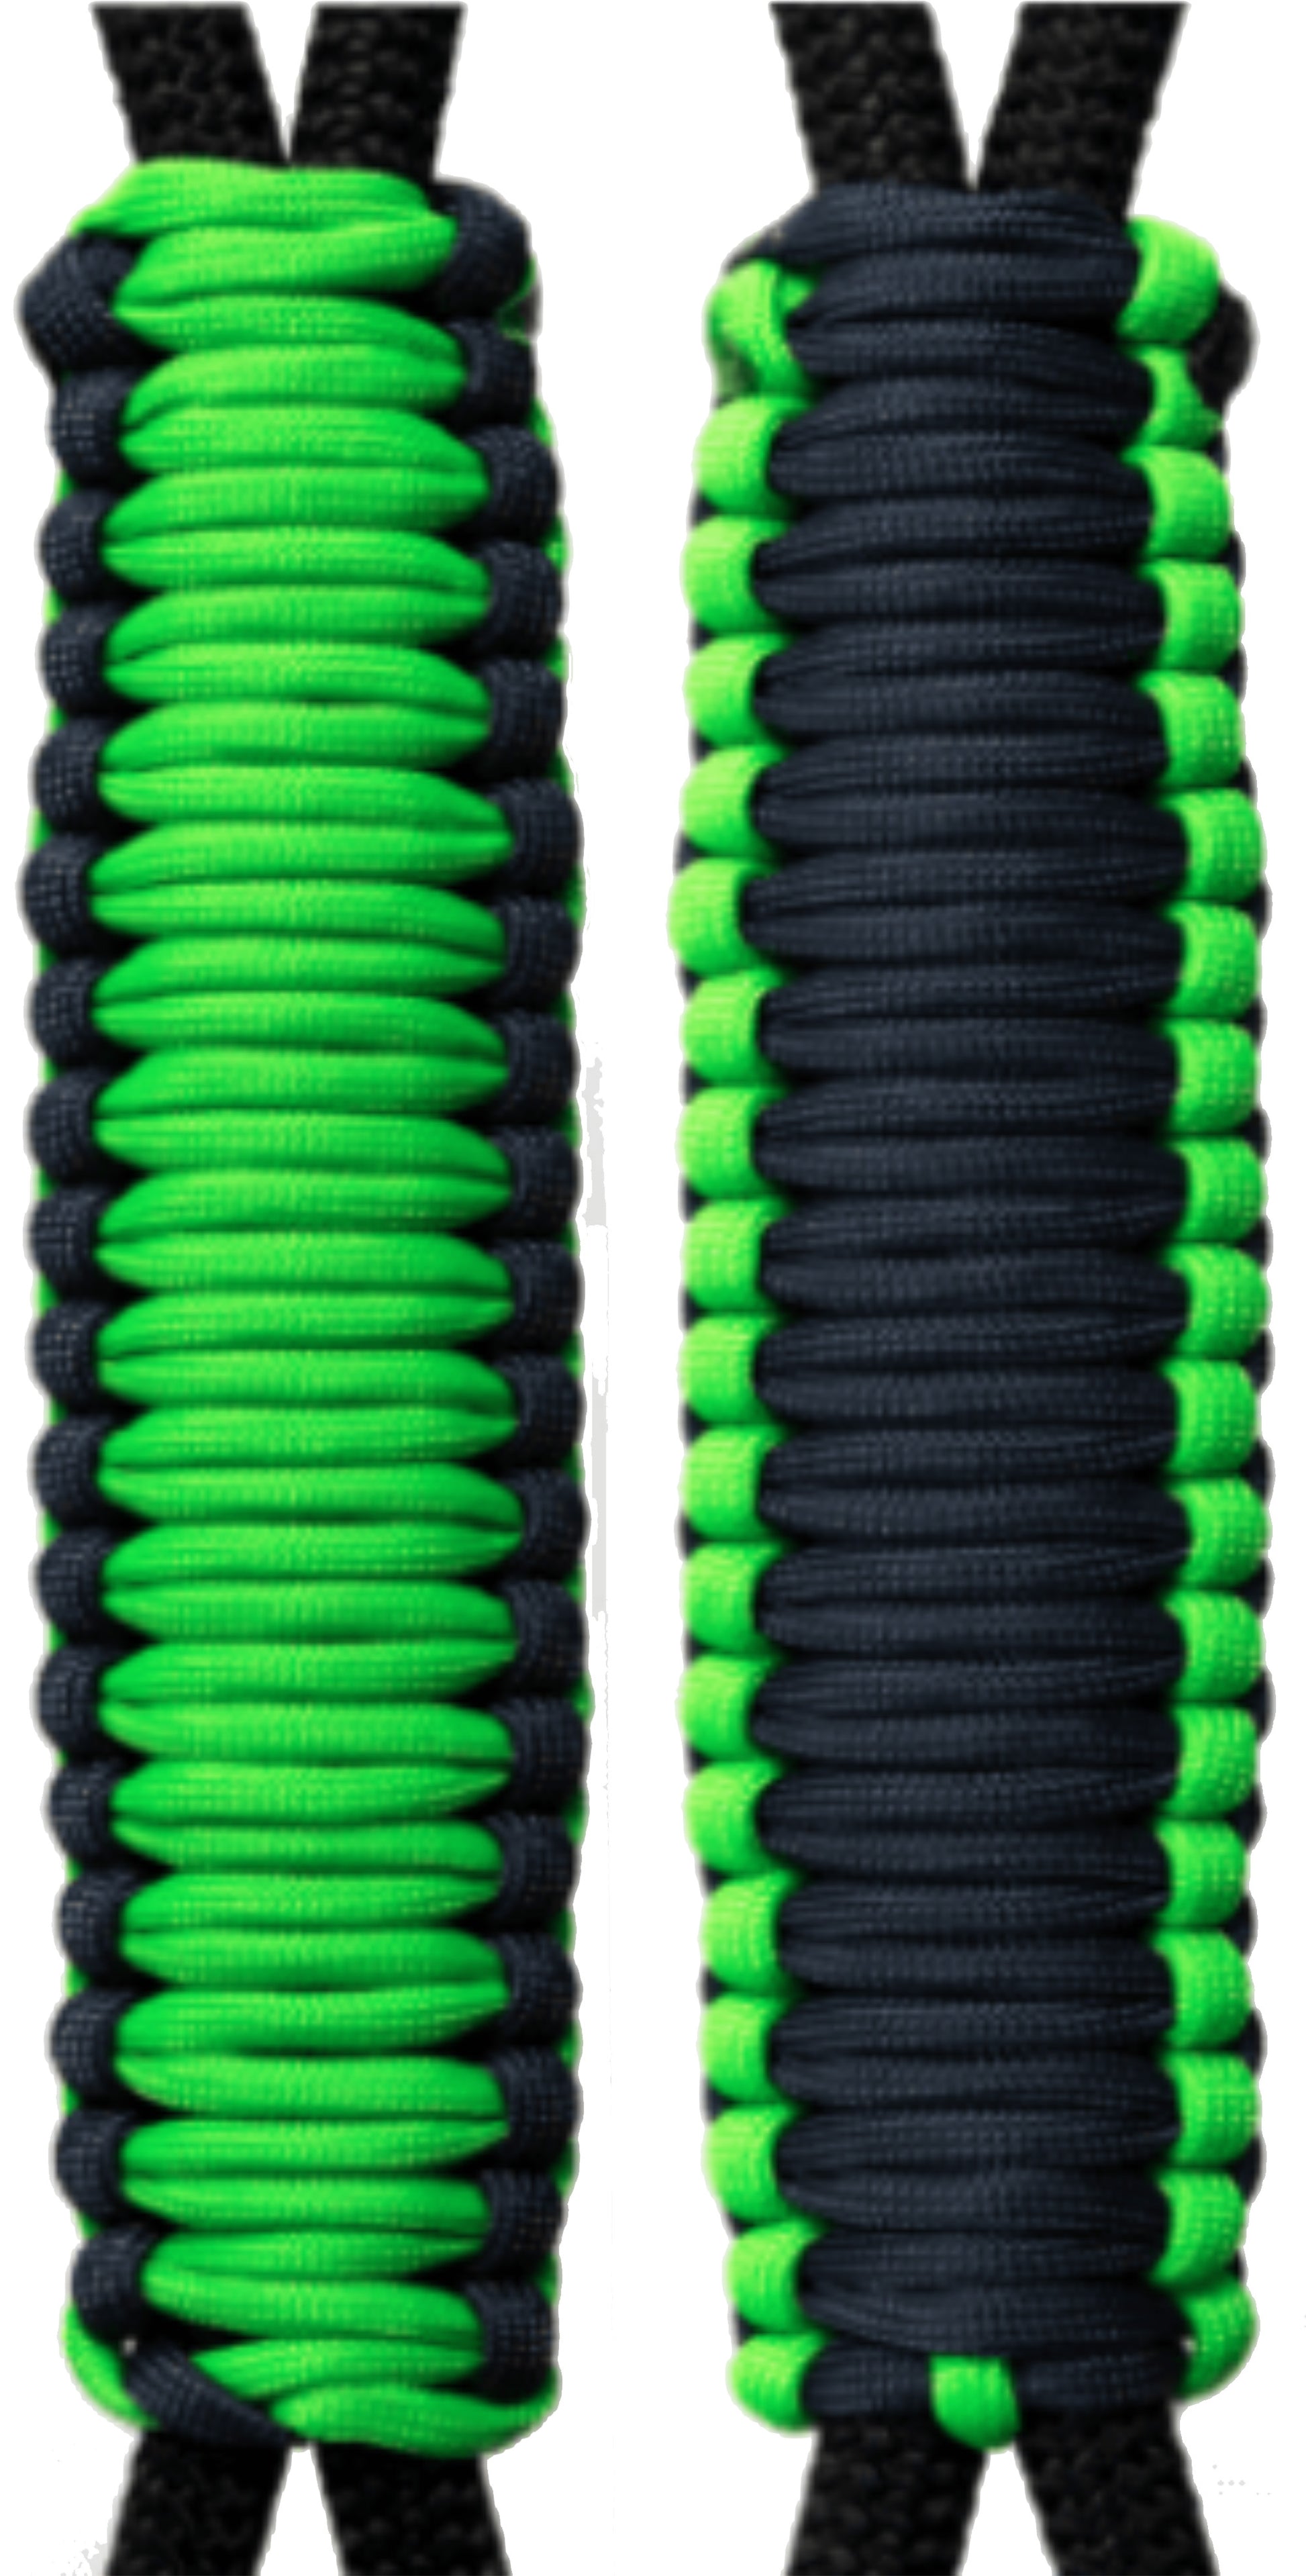 Paracord Handmade Handles for Stainless Steel Tumblers - Made in USA!